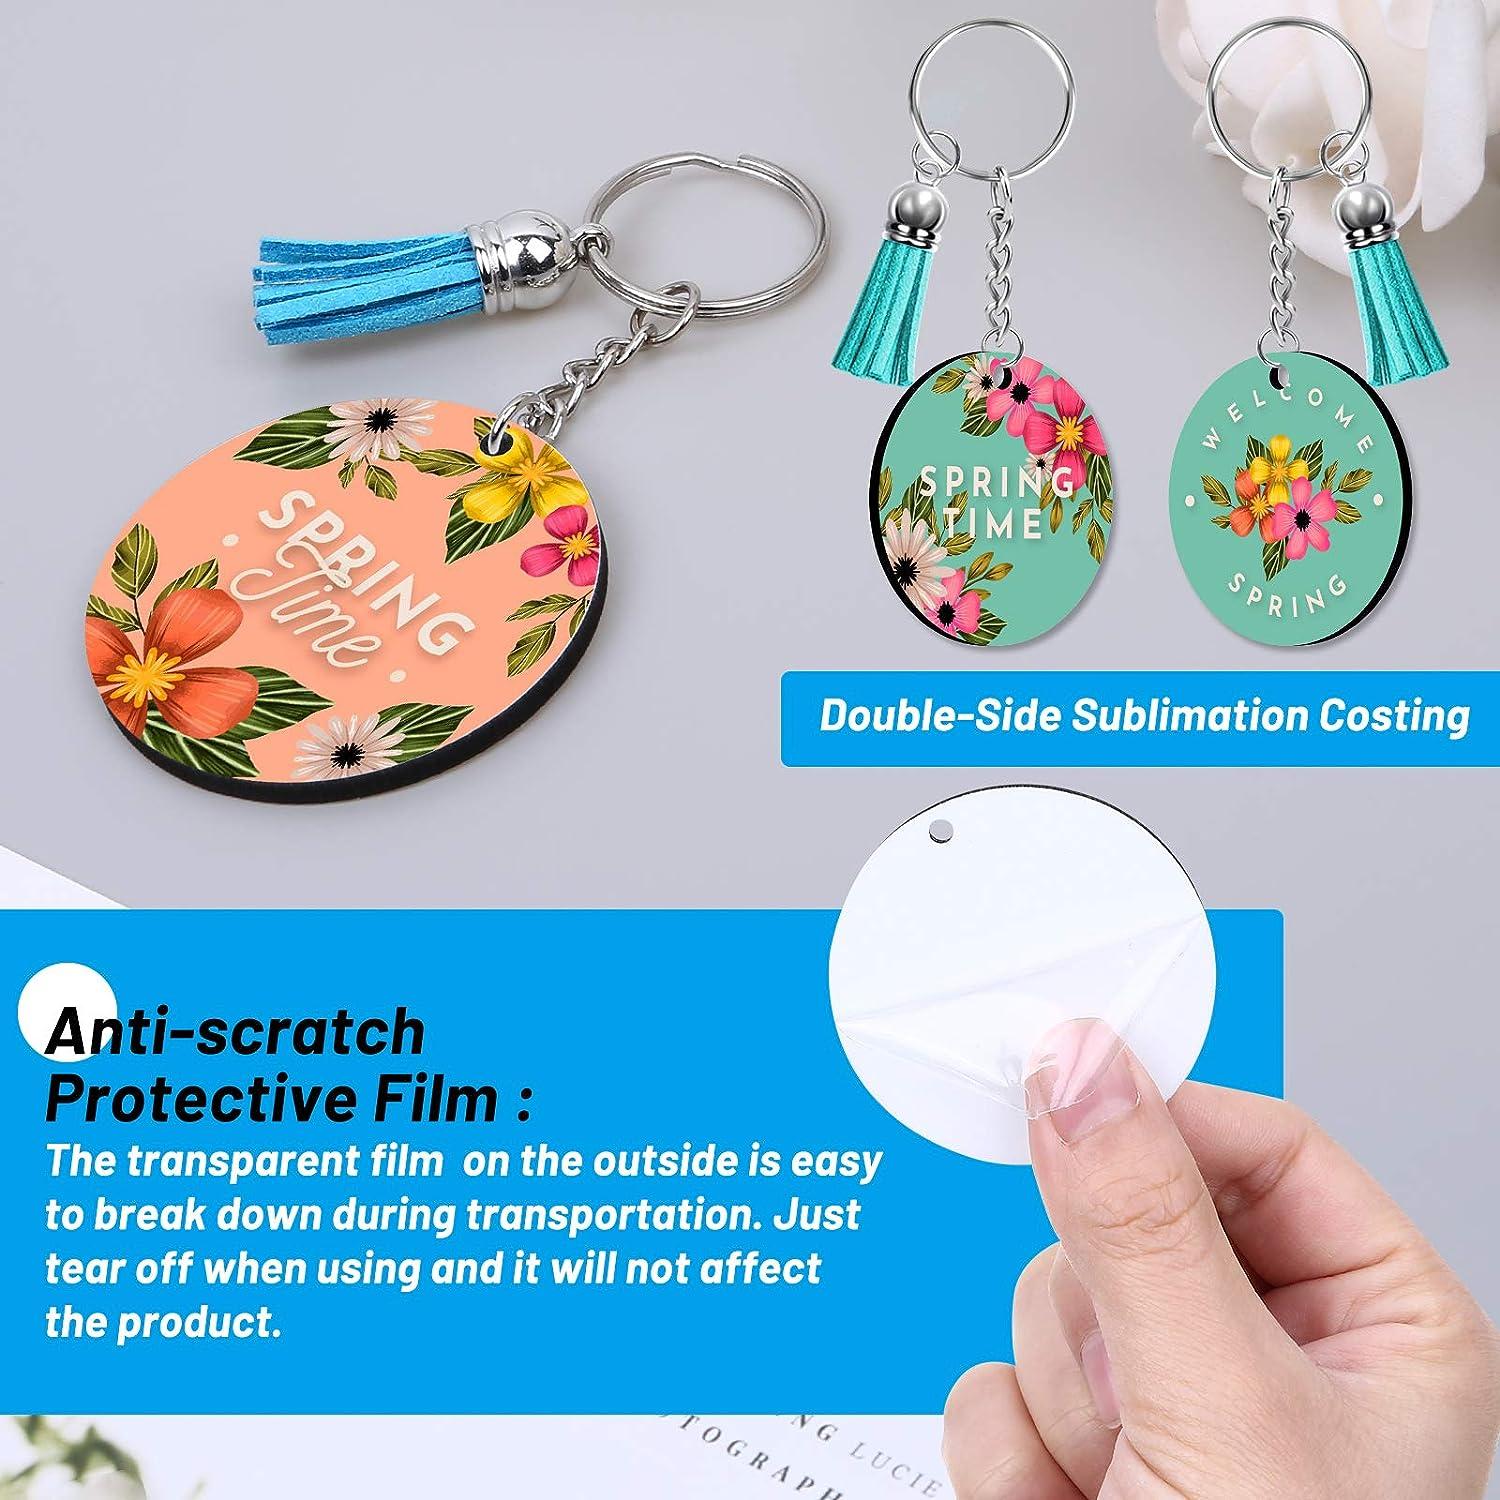 29Pcs Sublimation Blanks Products Set Including Makeup Bag Cosmetic Pouch,  Earrings, Keychain,Drink Cup Coasters For DIY